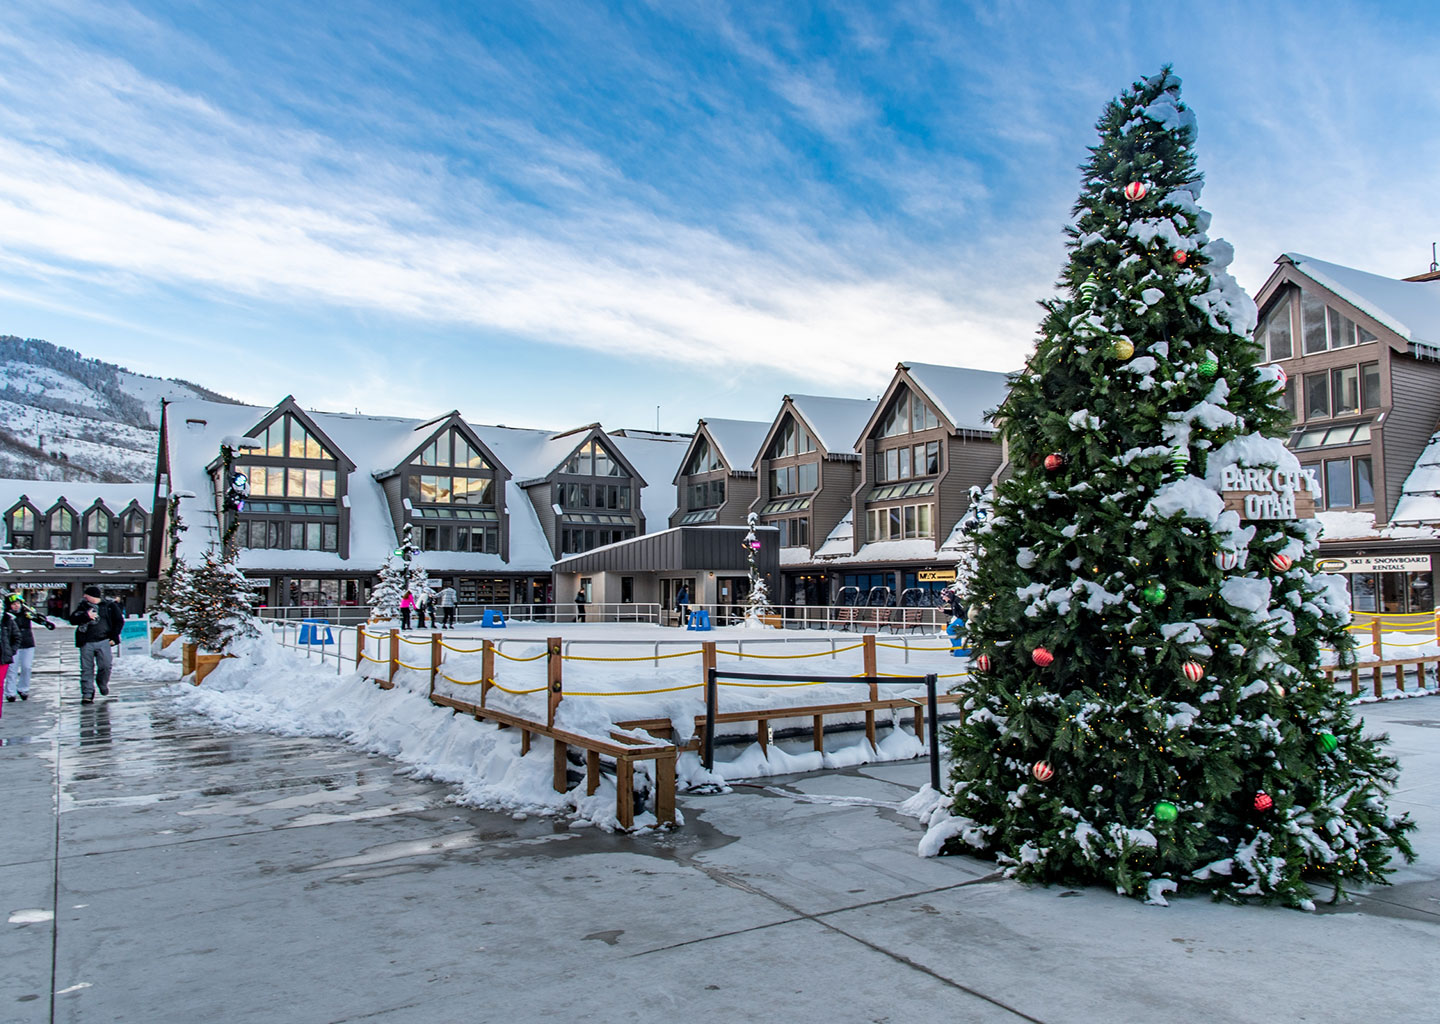 Ice Skating Rink in Winter at The Lodge at the Mountain Village in Park City, Utah